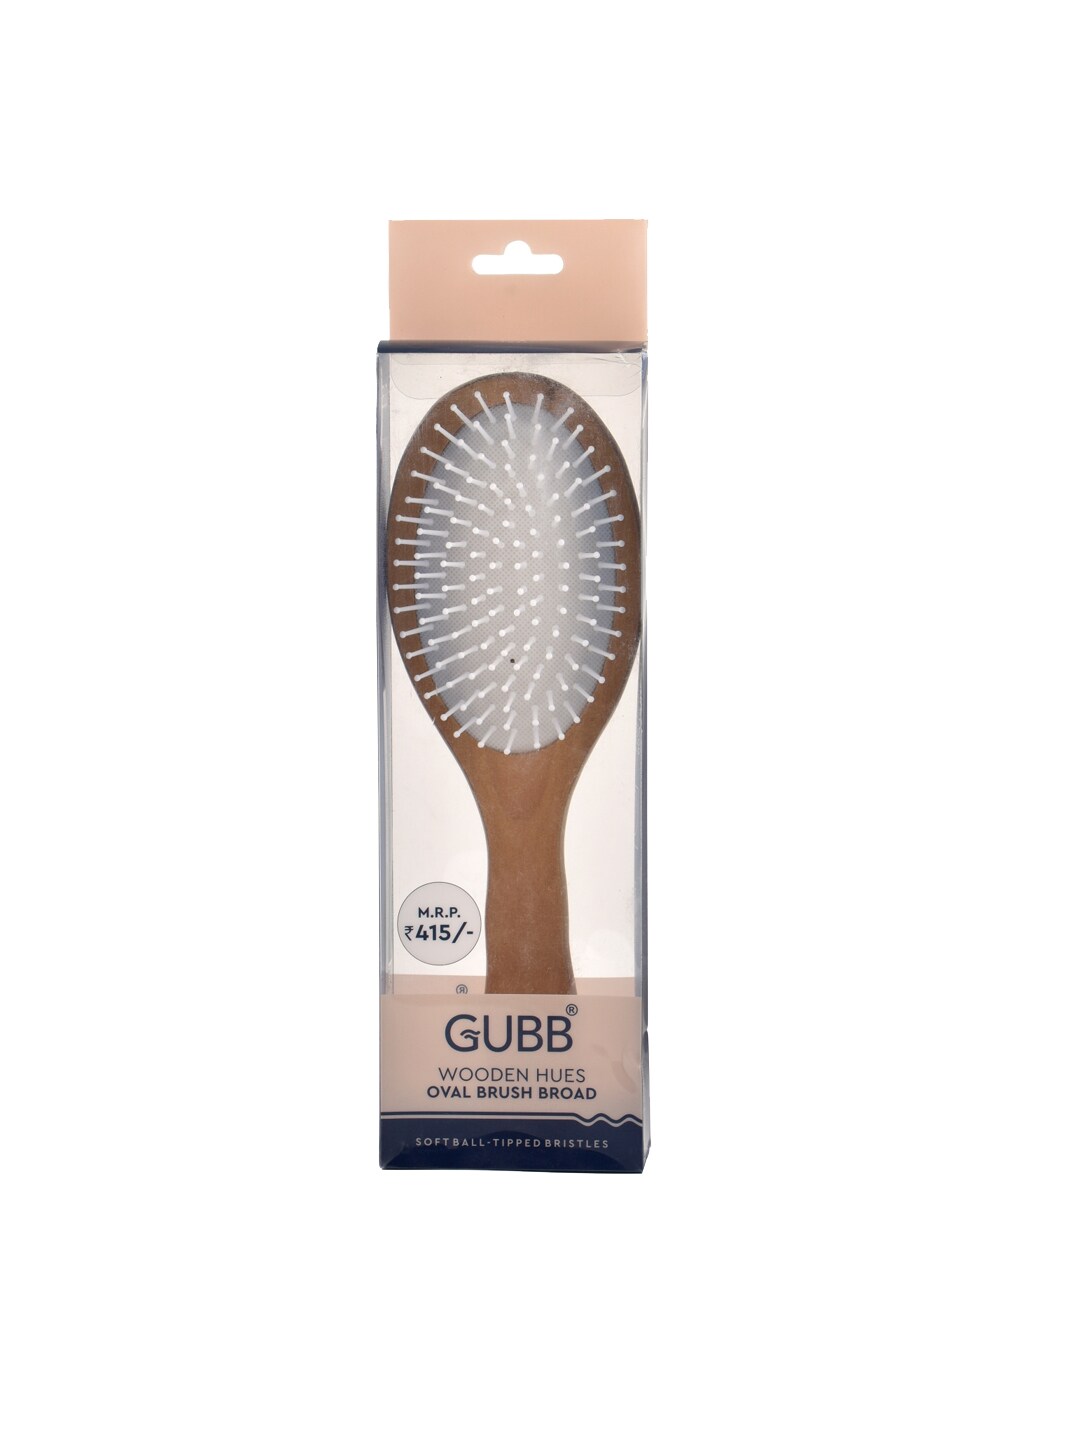 GUBB Adults Unisex Oval Wooden Hair Brush Broad GB-LH-044 ( Hues) Price in India